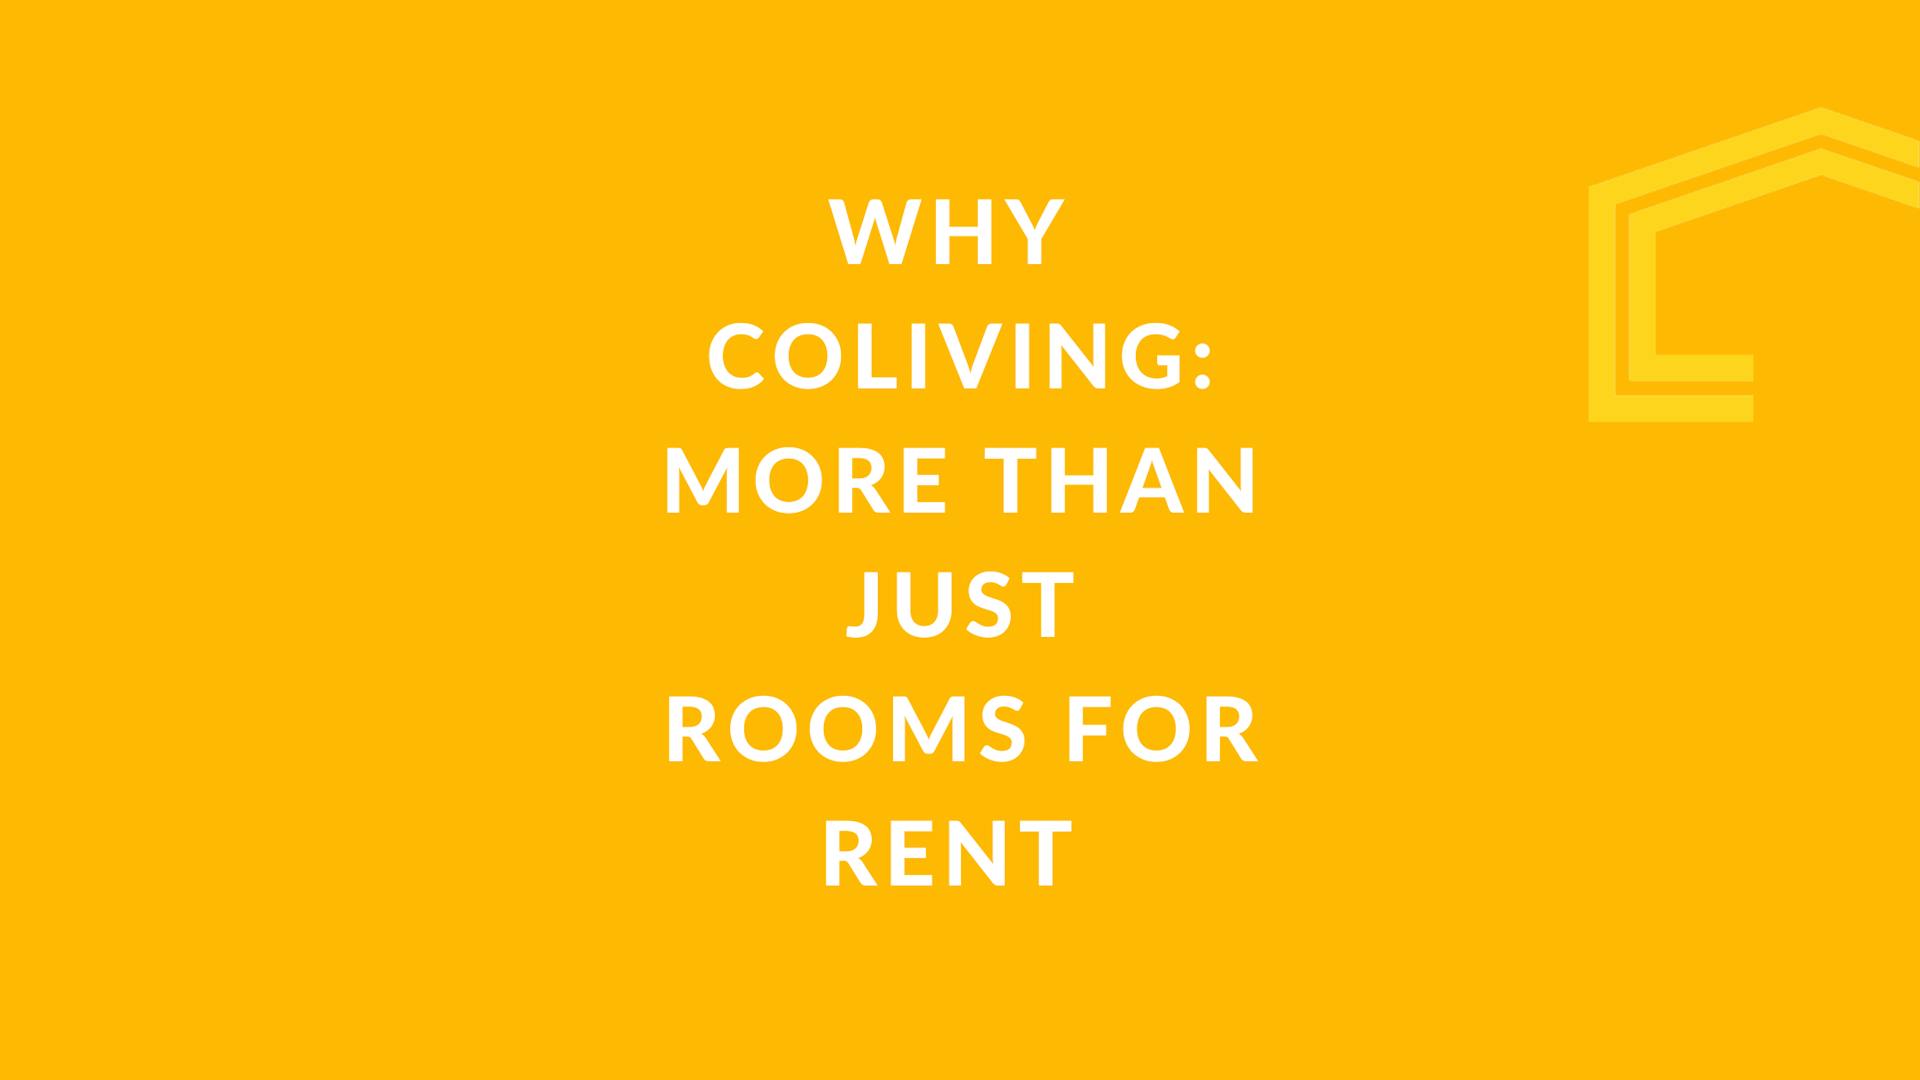 Why Coliving: More than just rooms for rent